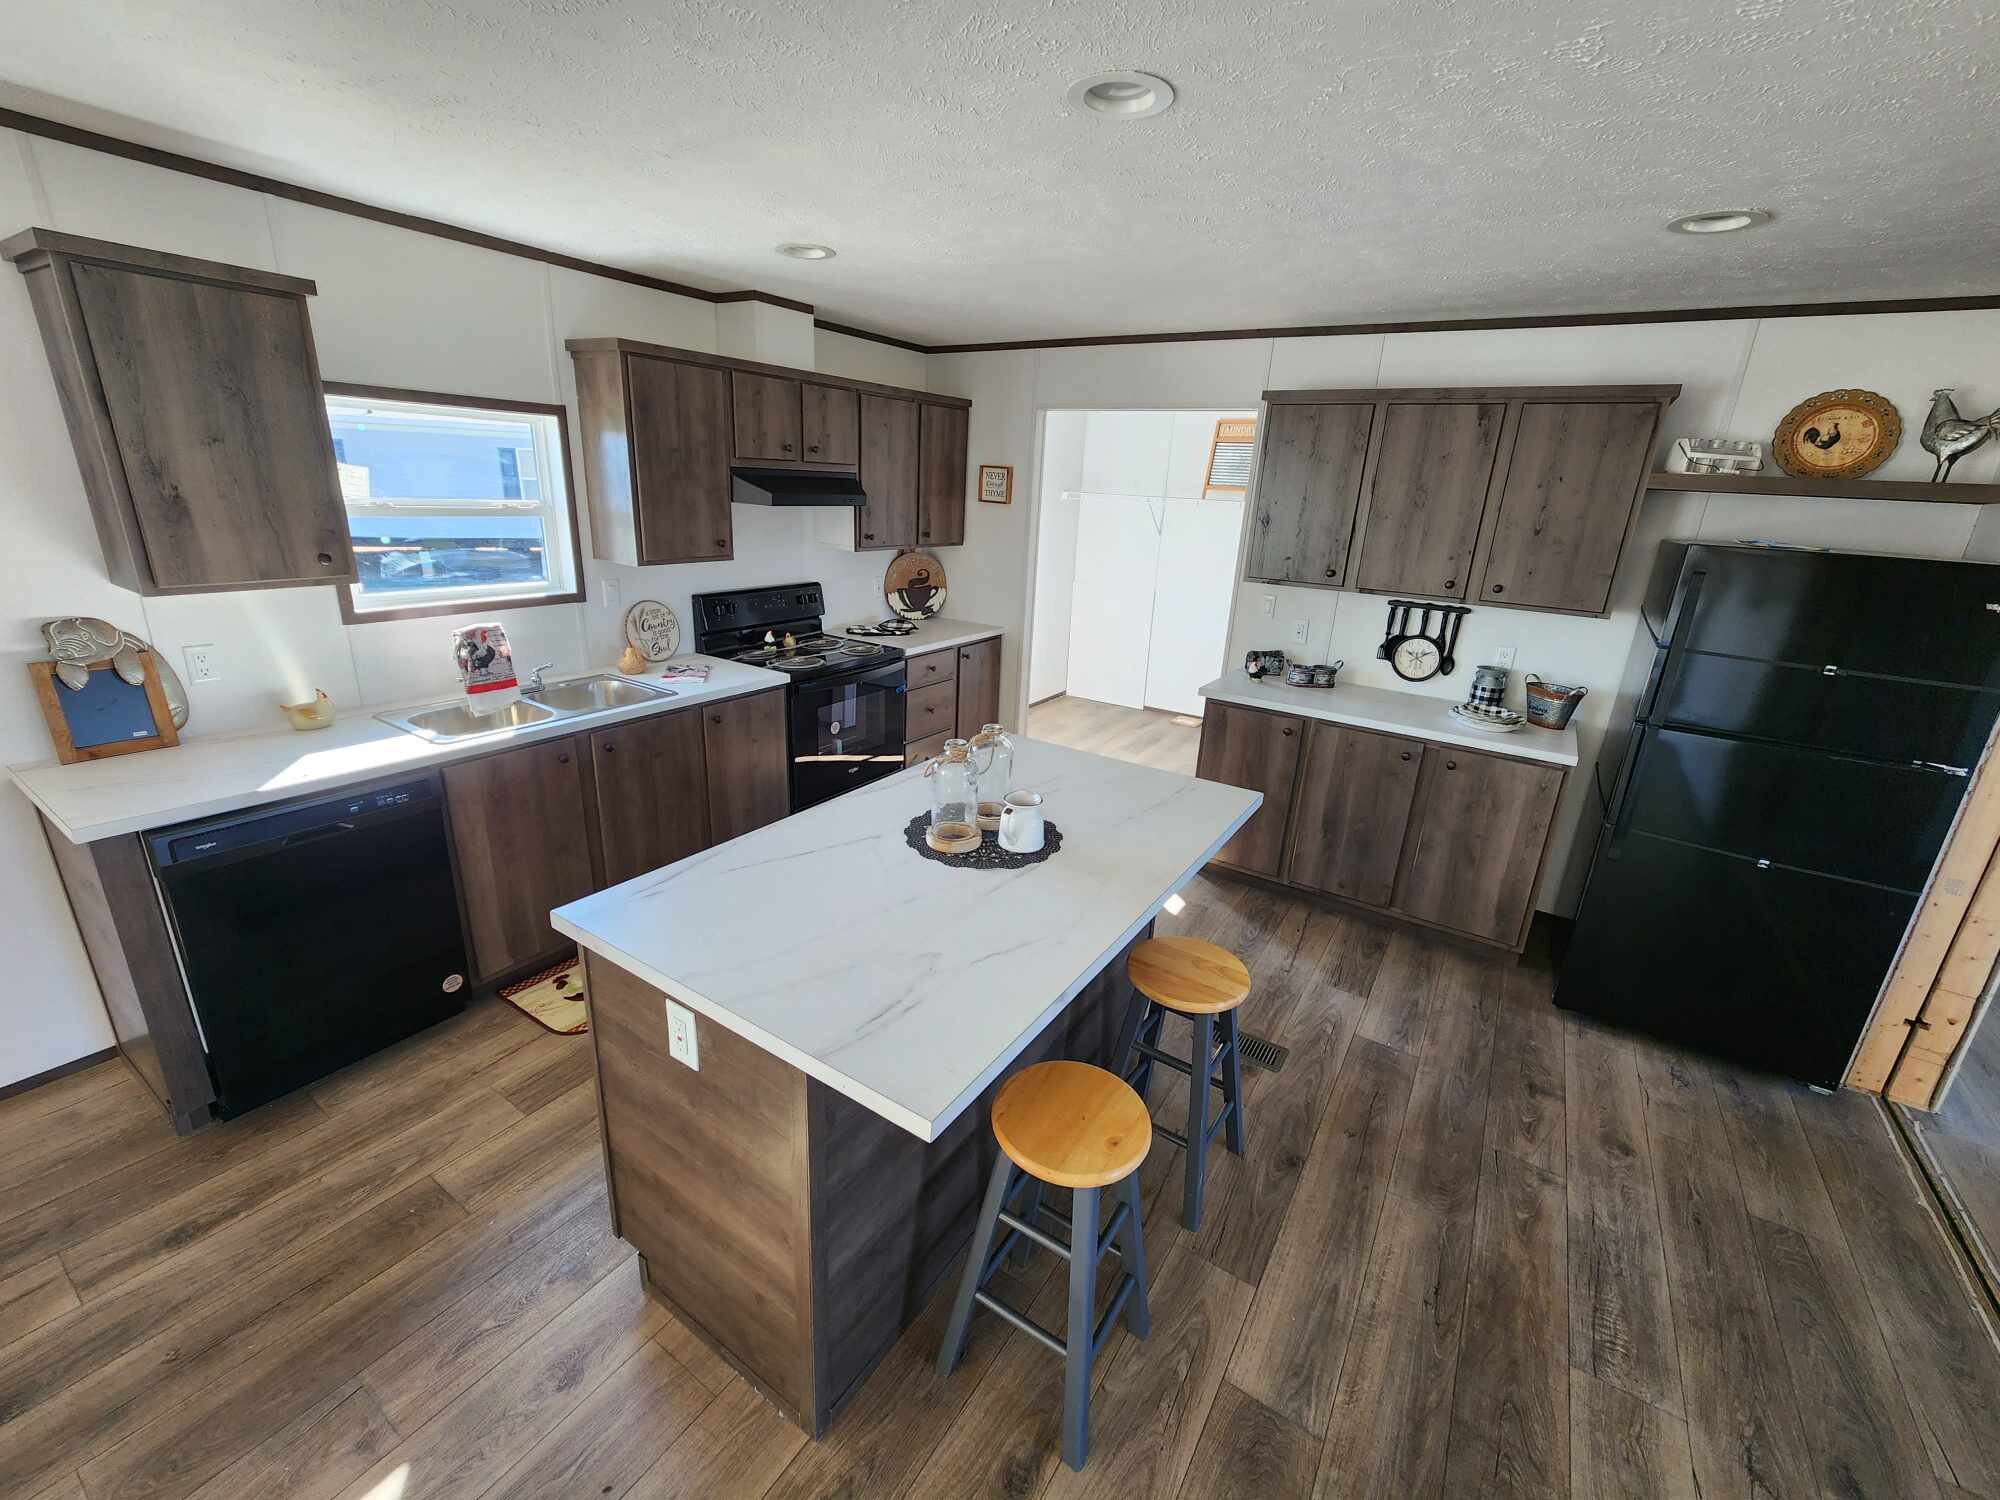 FLEETWOOD CAYMAN 270 - ONLY ONE LEFT!

🏡 Spacious Dimensions: 32x56(60)

✨ Comfortable Layout: 3 Bedrooms and 2 Bathrooms

🌟 Ample Living Space: 1700 Square Feet

🔥 Modern Amenities: Brand New Appliances

🌿 Elegant &amp; Low-Maintenance: Vinyl Fl